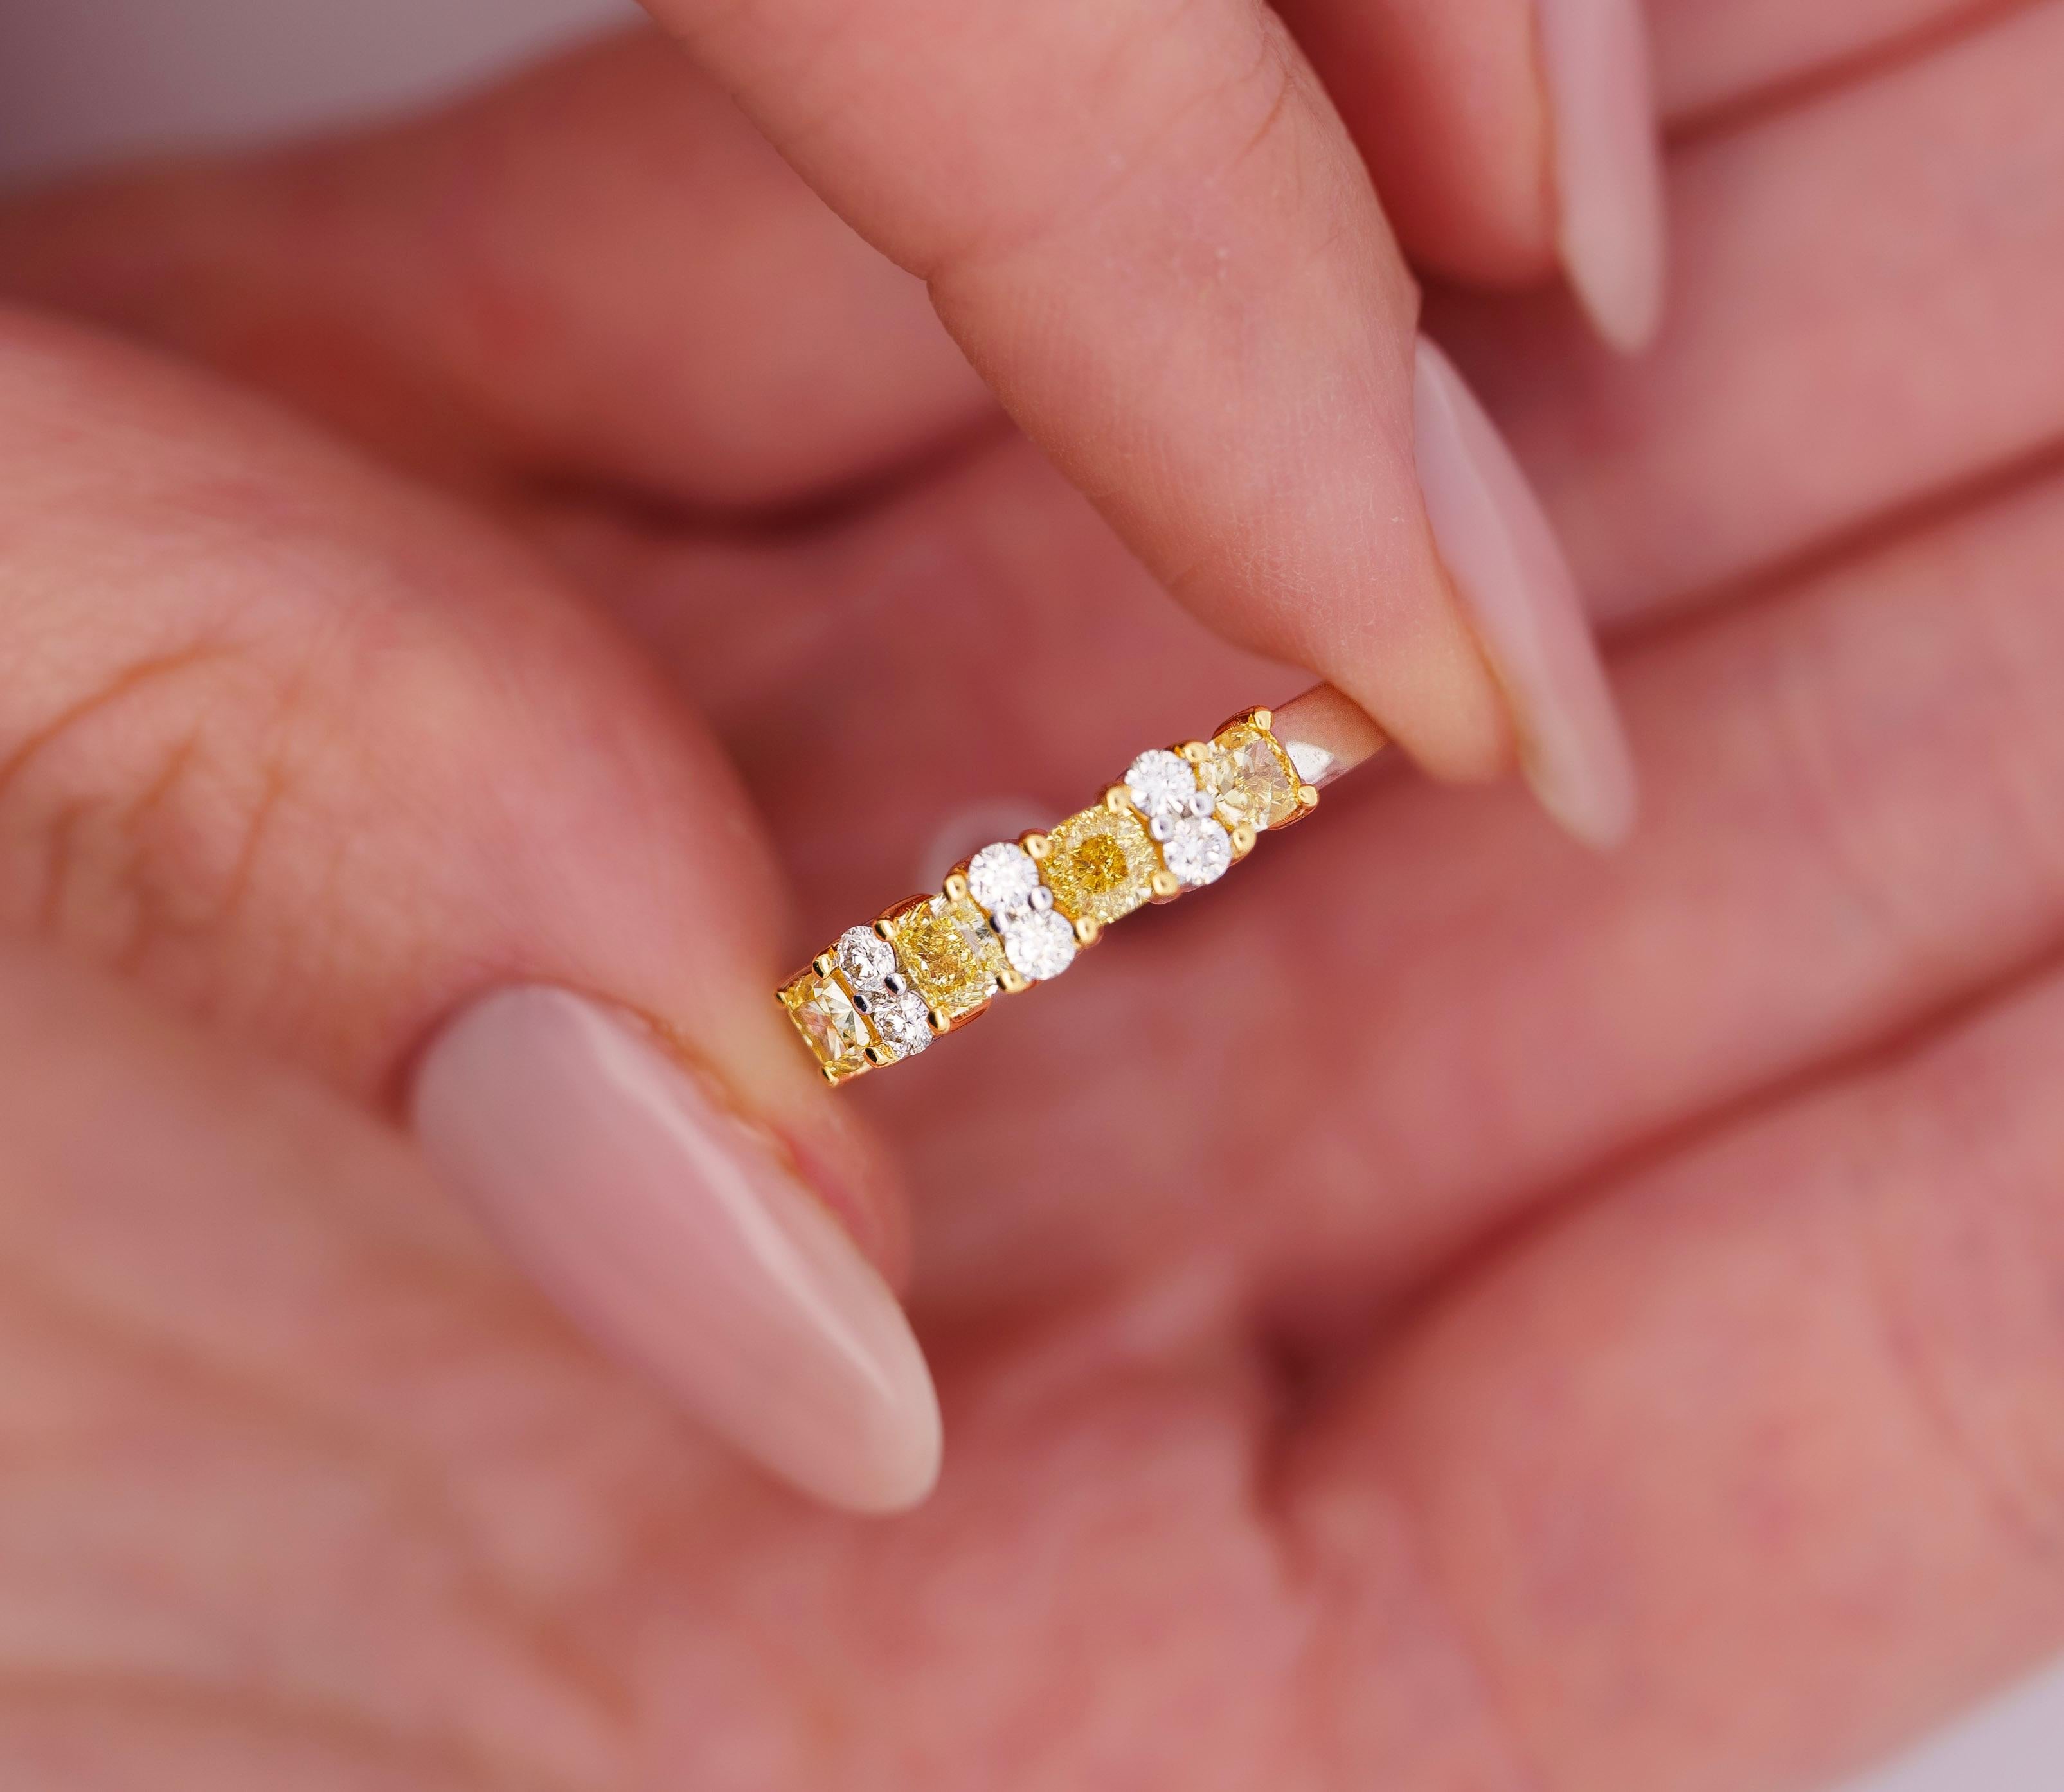 1 Carat Total Fancy Yellow and White Diamond Band Ring in 18k Solid Gold. This stackable band features superbly brilliant natural diamonds that flank each other with excellent contrast and symmetry. The perfect band ring that matches both yellow and